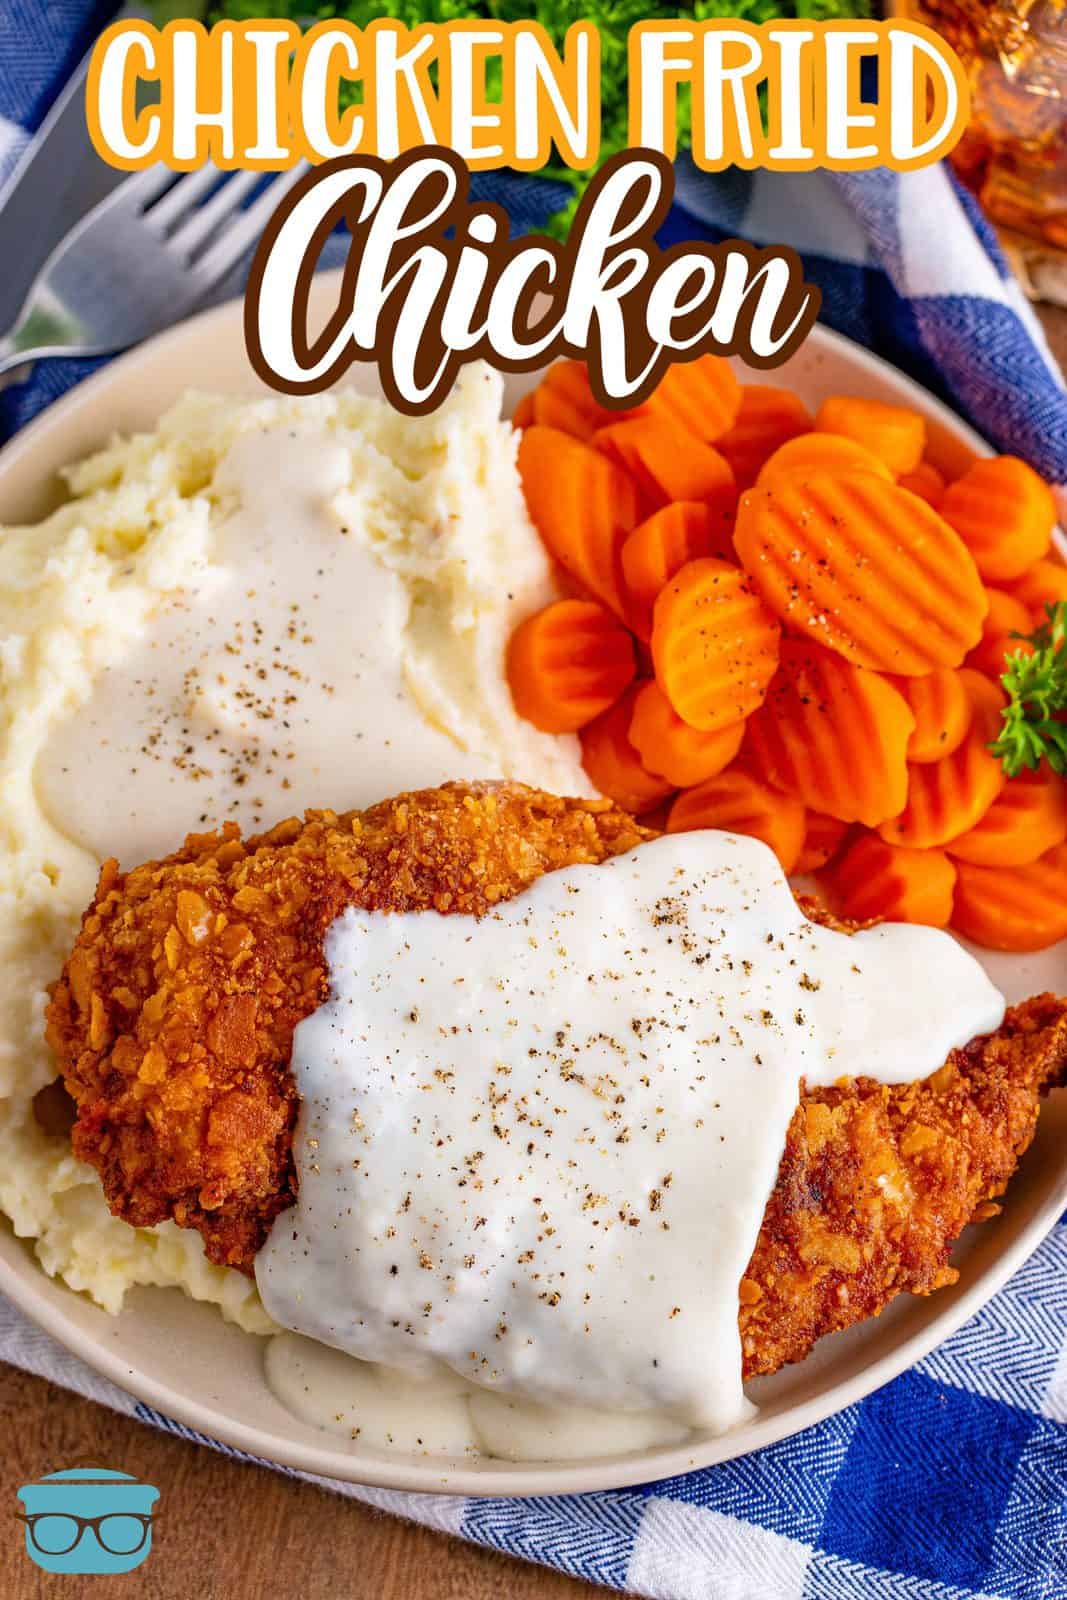 Pinterest image overhead of Chicken Fried Chicken on plate with mashed potatoes and gravy.